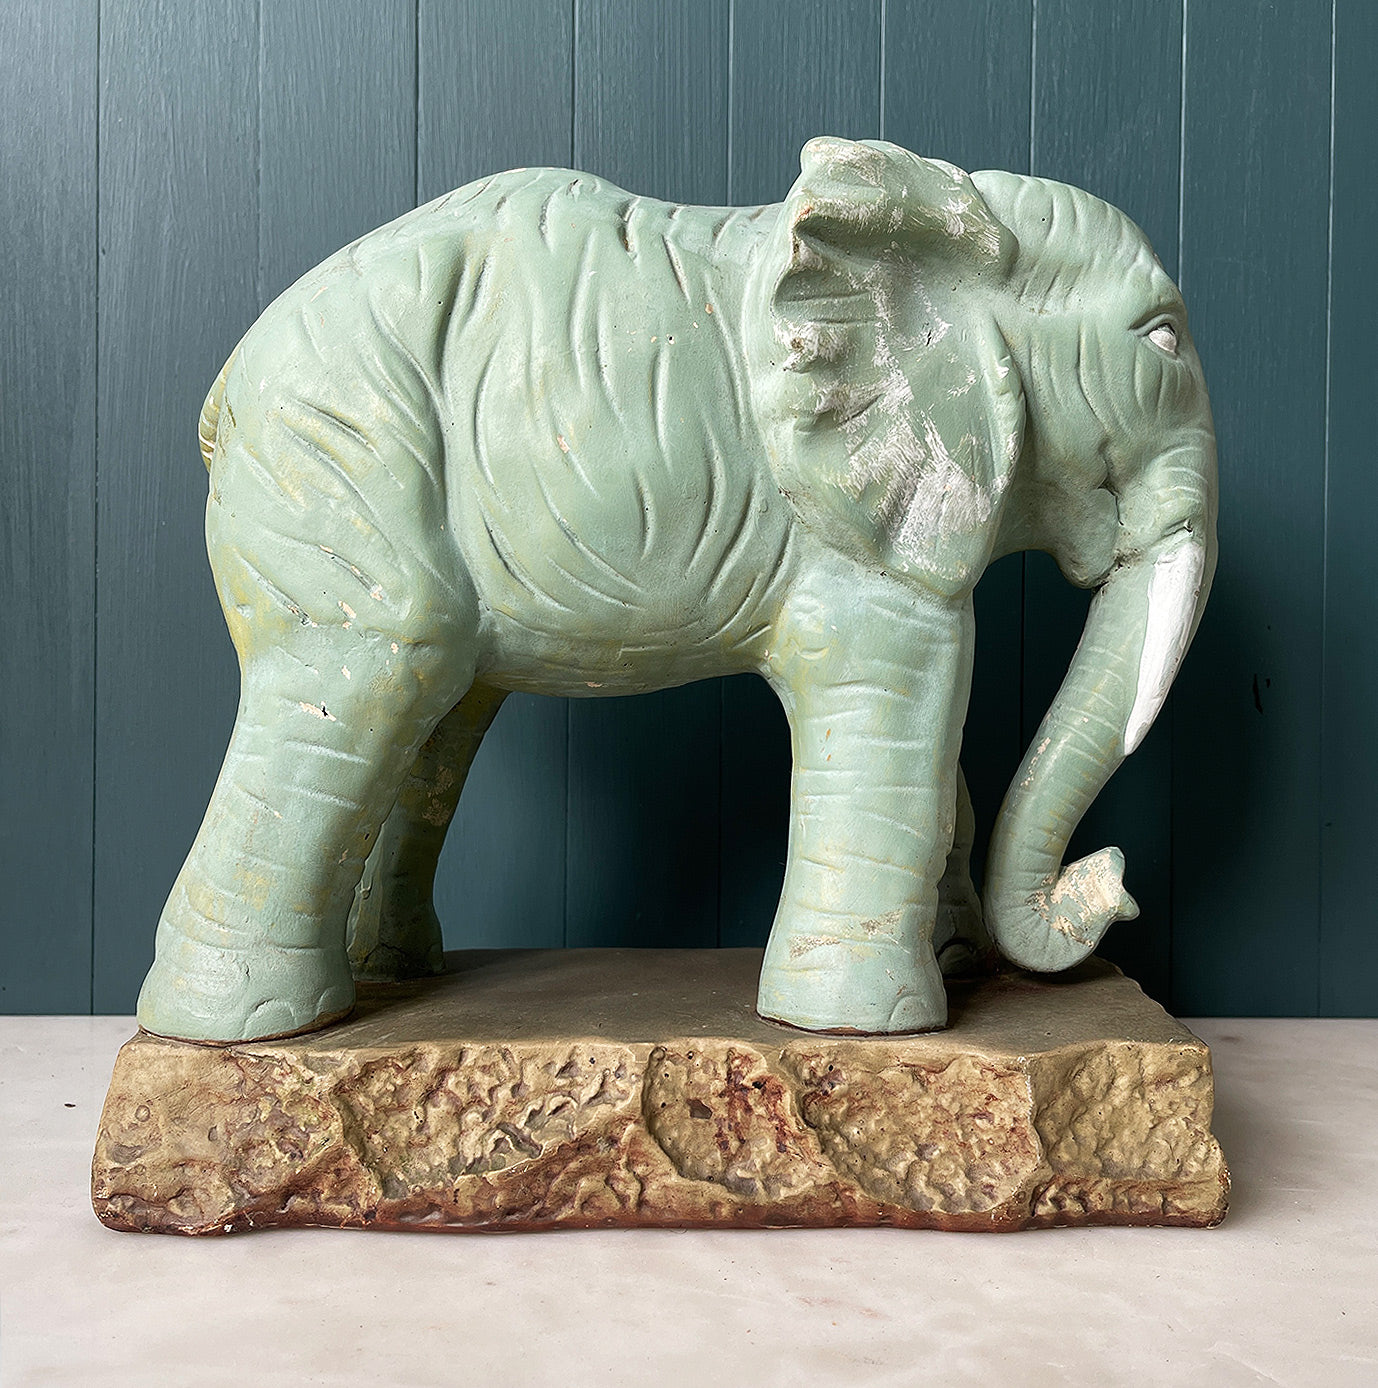 Wonderful large Vintage Green Advertising Elephant reportedly made for Esso's Elephant Kerosene. The green painted finish is a hand painted chalky green colour with yellowy green painted highlights. He stands majestically on a rocky base - SHOP NOW - www.intovintage.co.uk